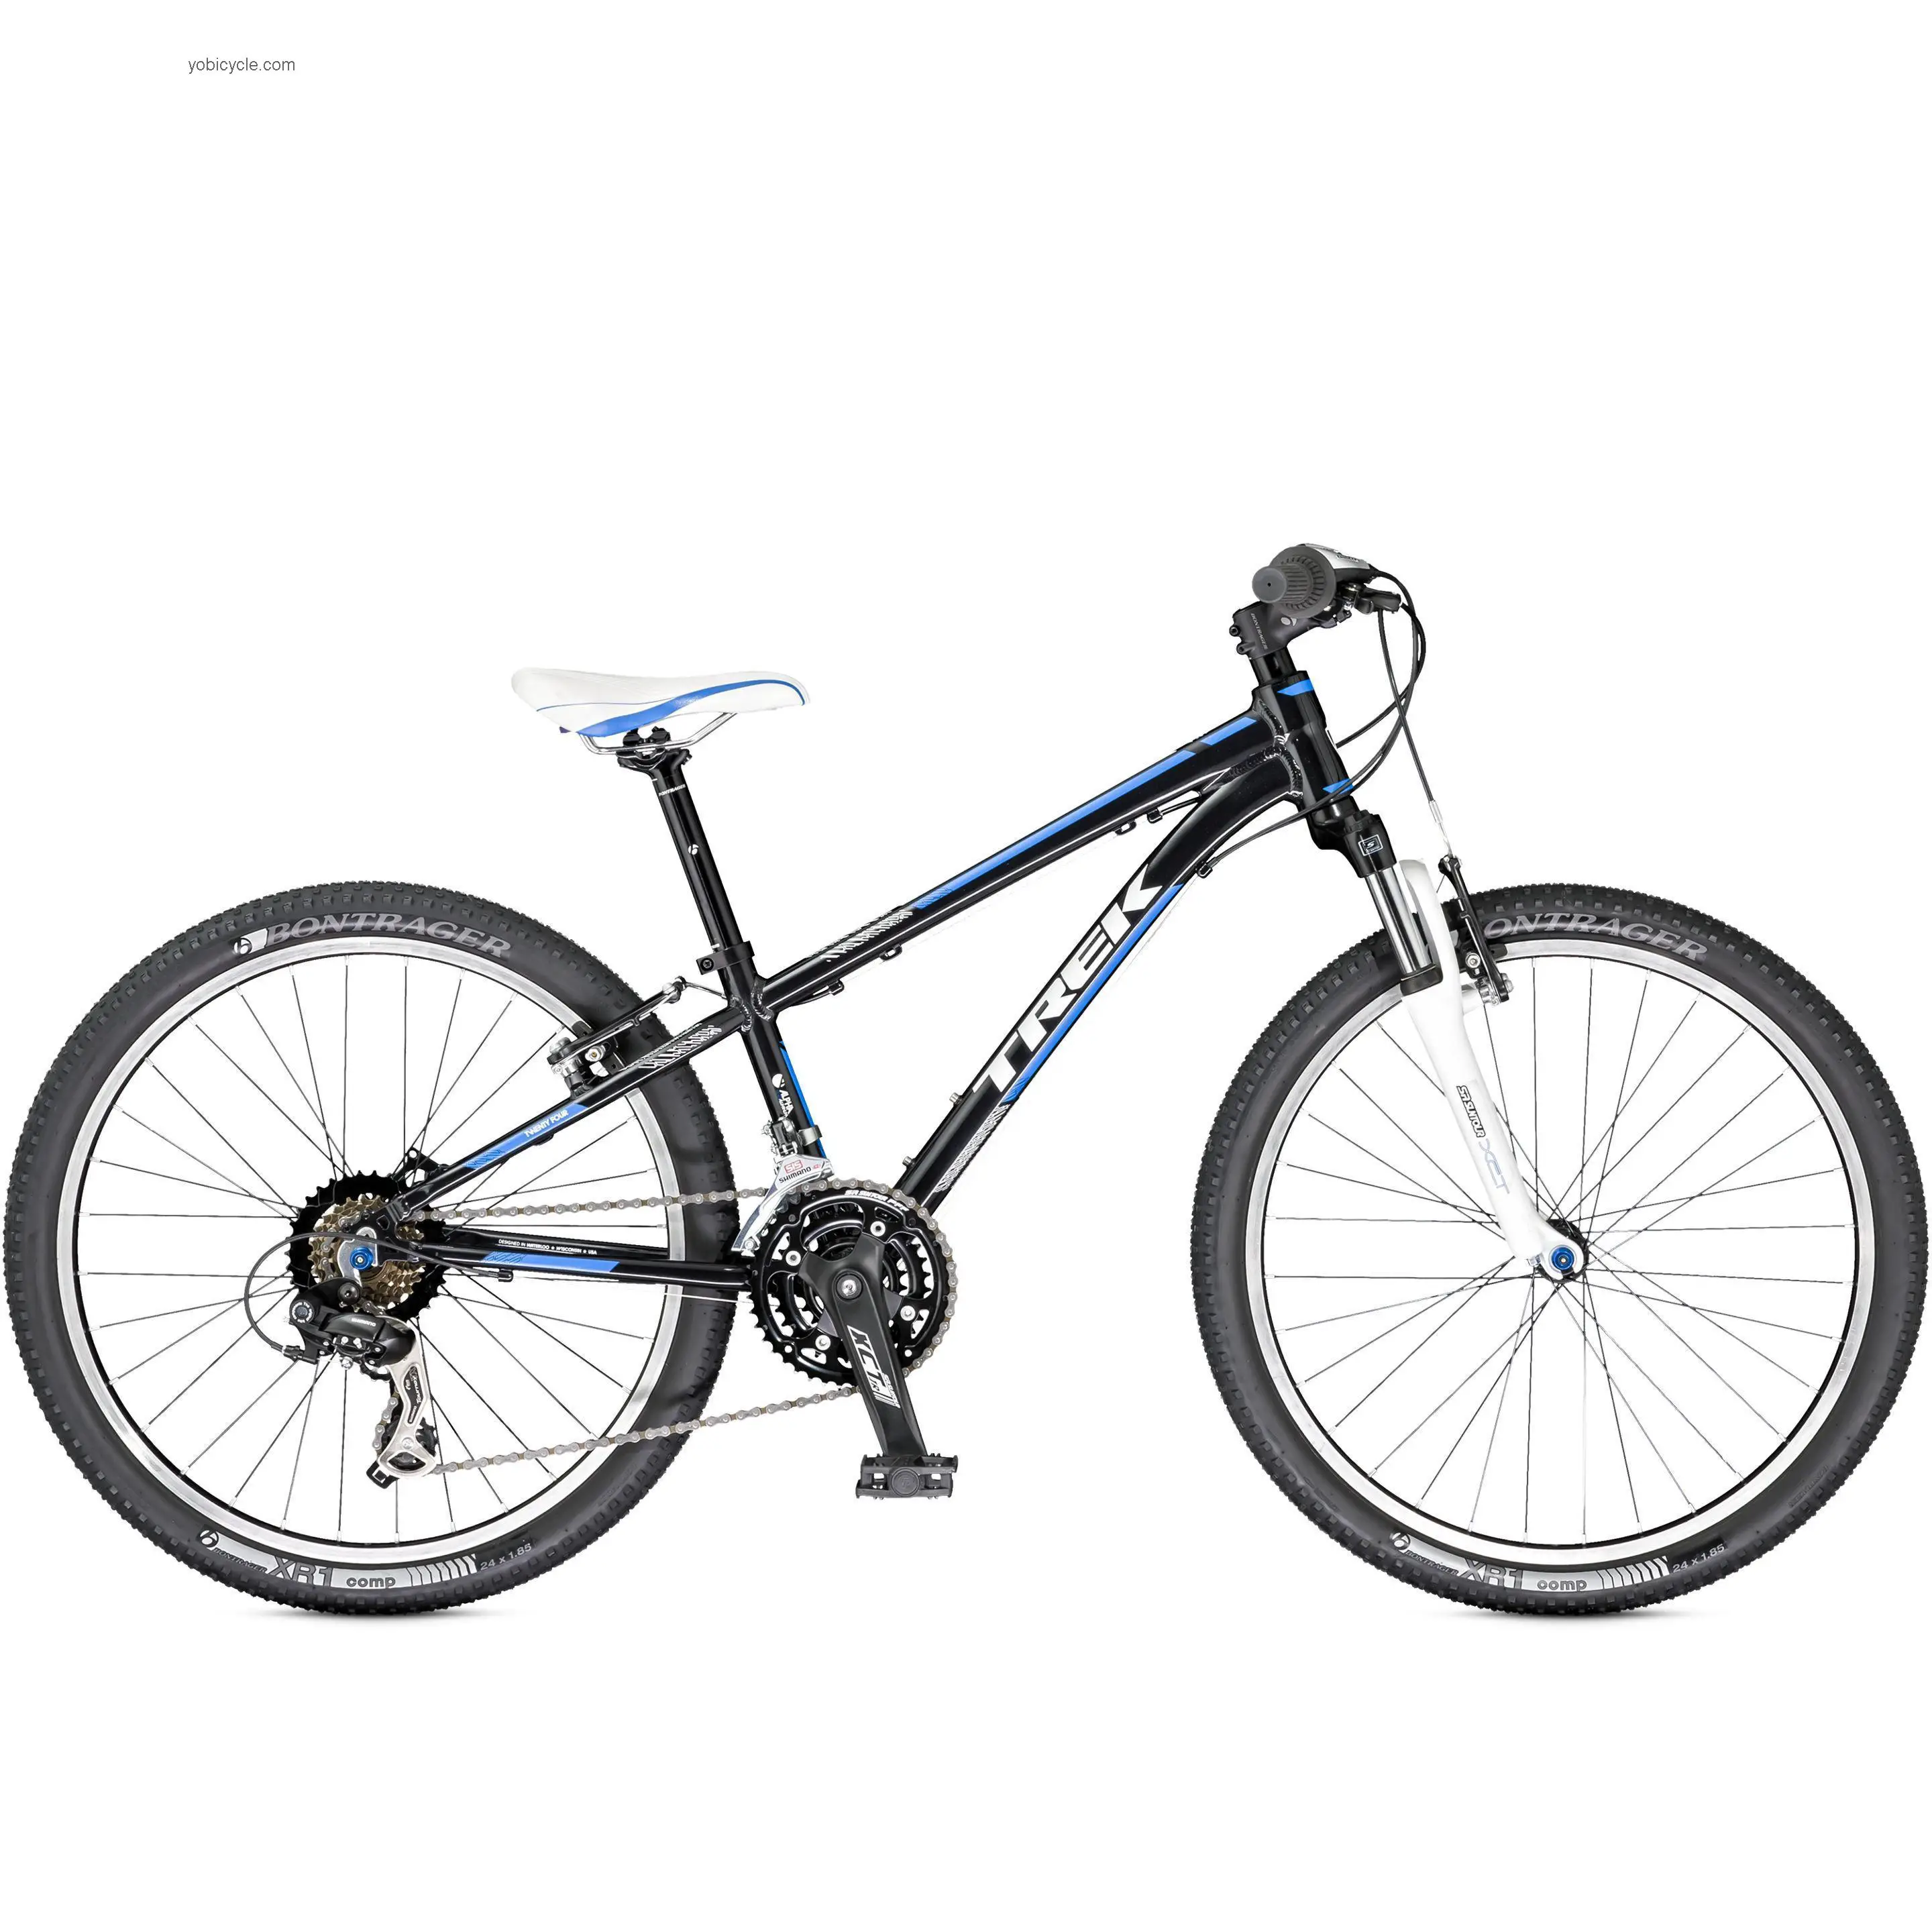 Trek Superfly 24 2014 comparison online with competitors